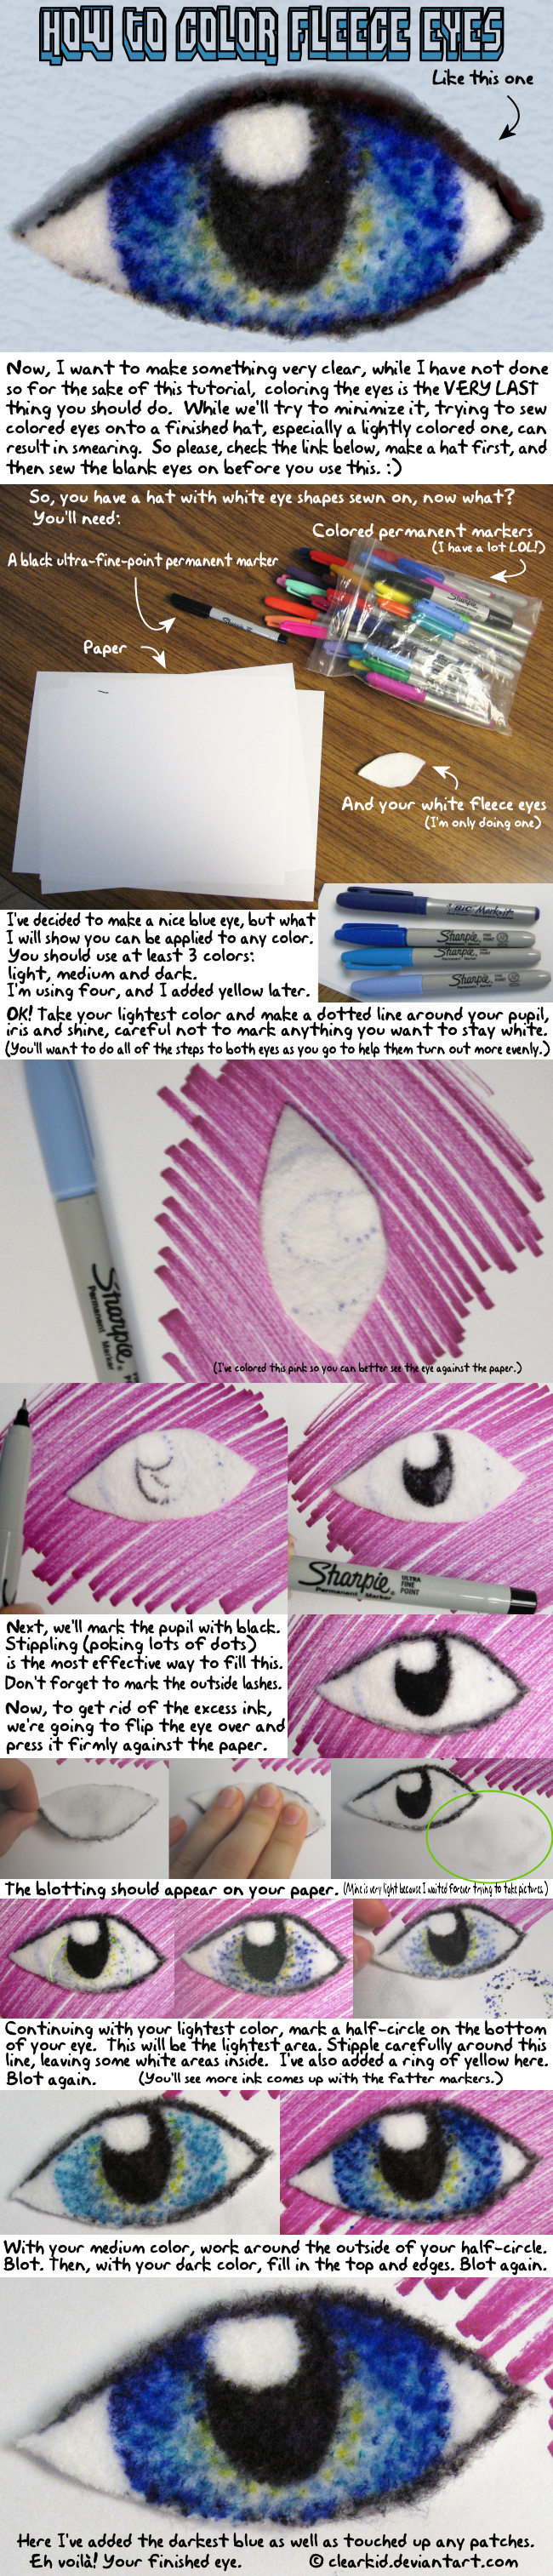 How to Color Fleece Eyes